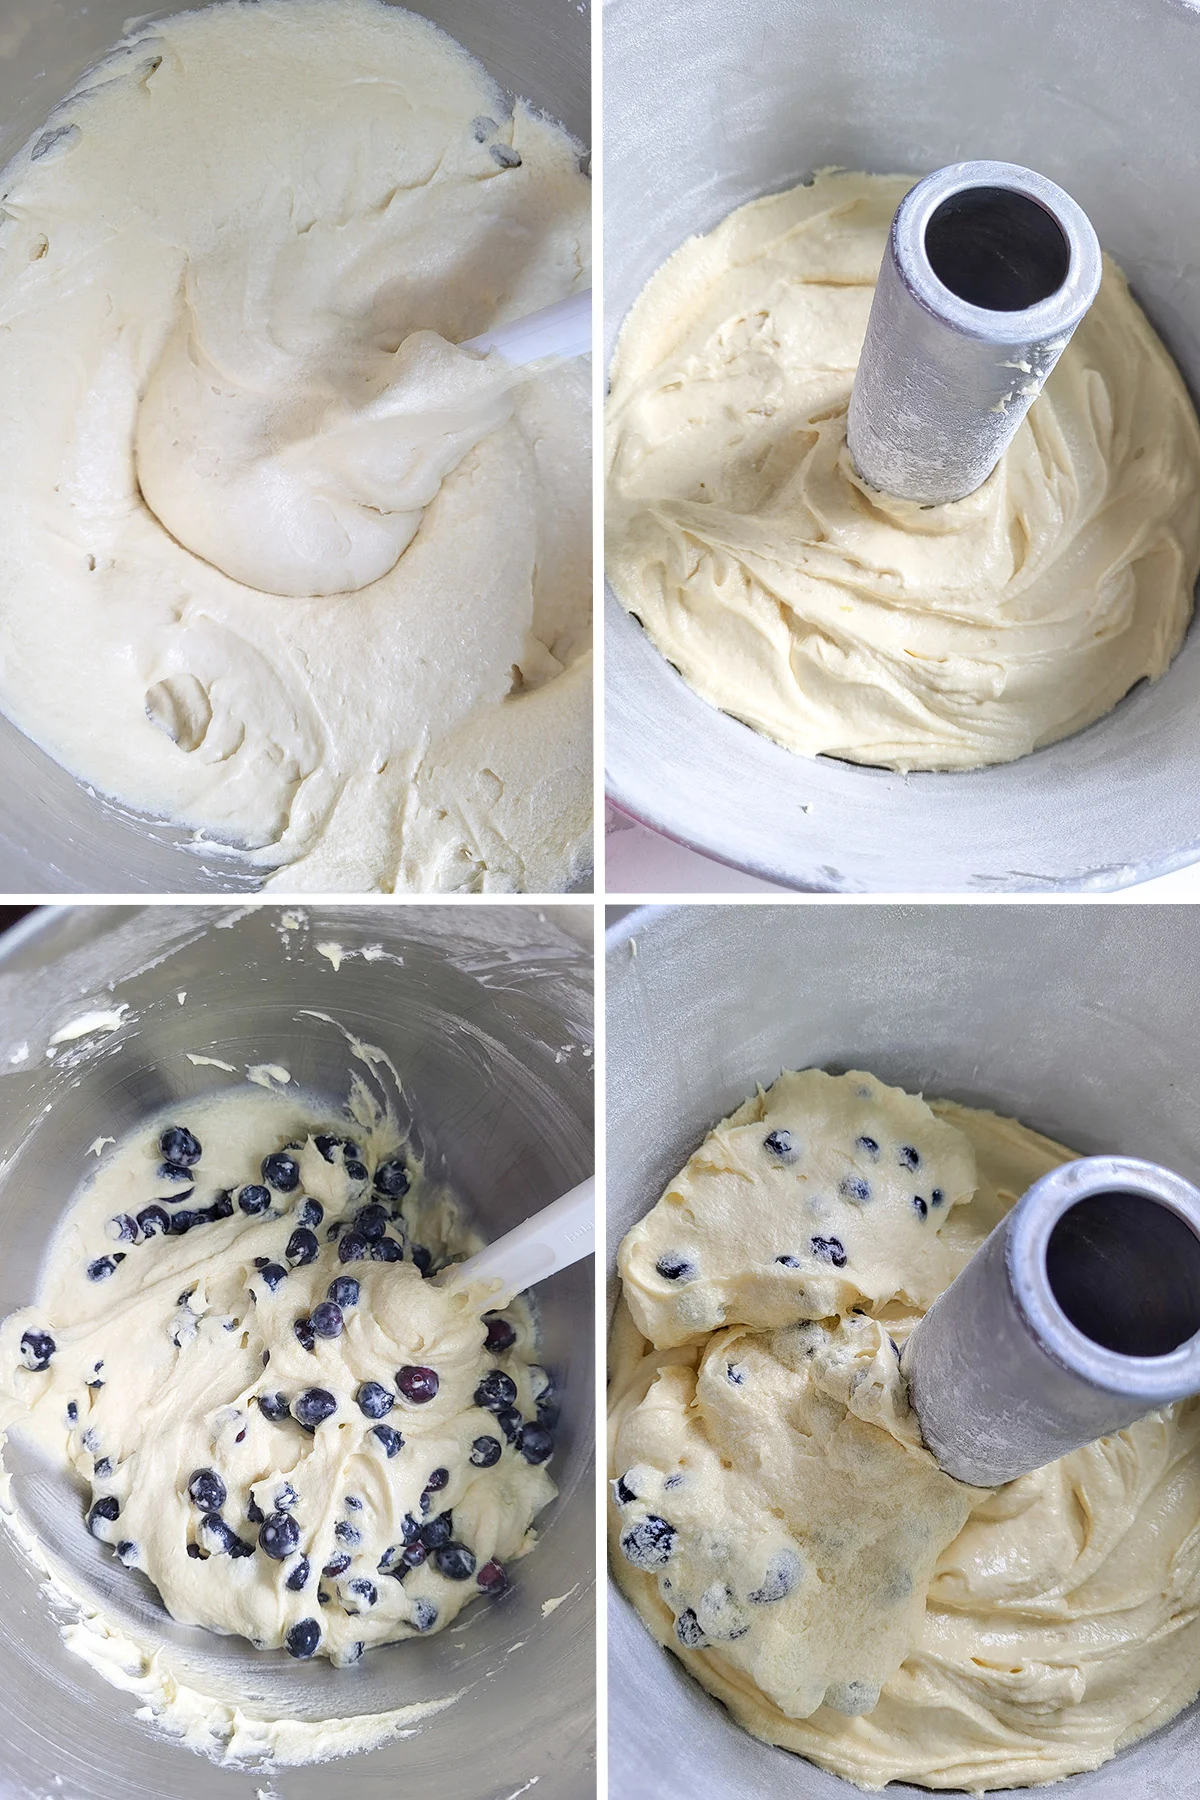 Cake batter with blueberries folded in. Cake batter spread in a tube pan.